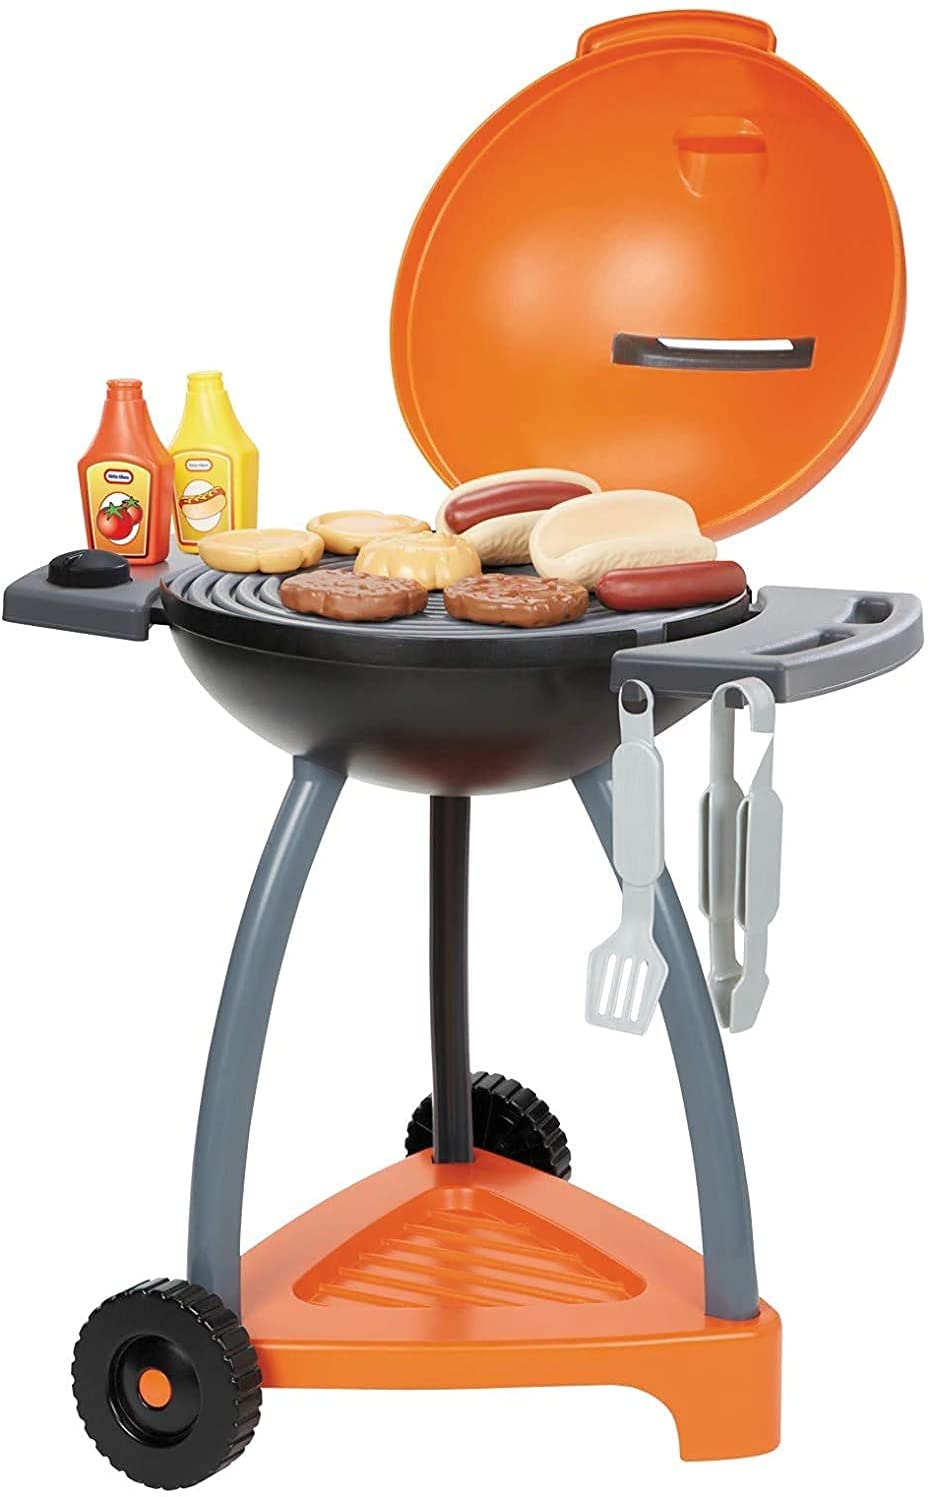 Little Tikes Sizzle and Serve Grill Kitchen Playset $15 + Free Shipping w/ Amazon Prime or Orders $25+